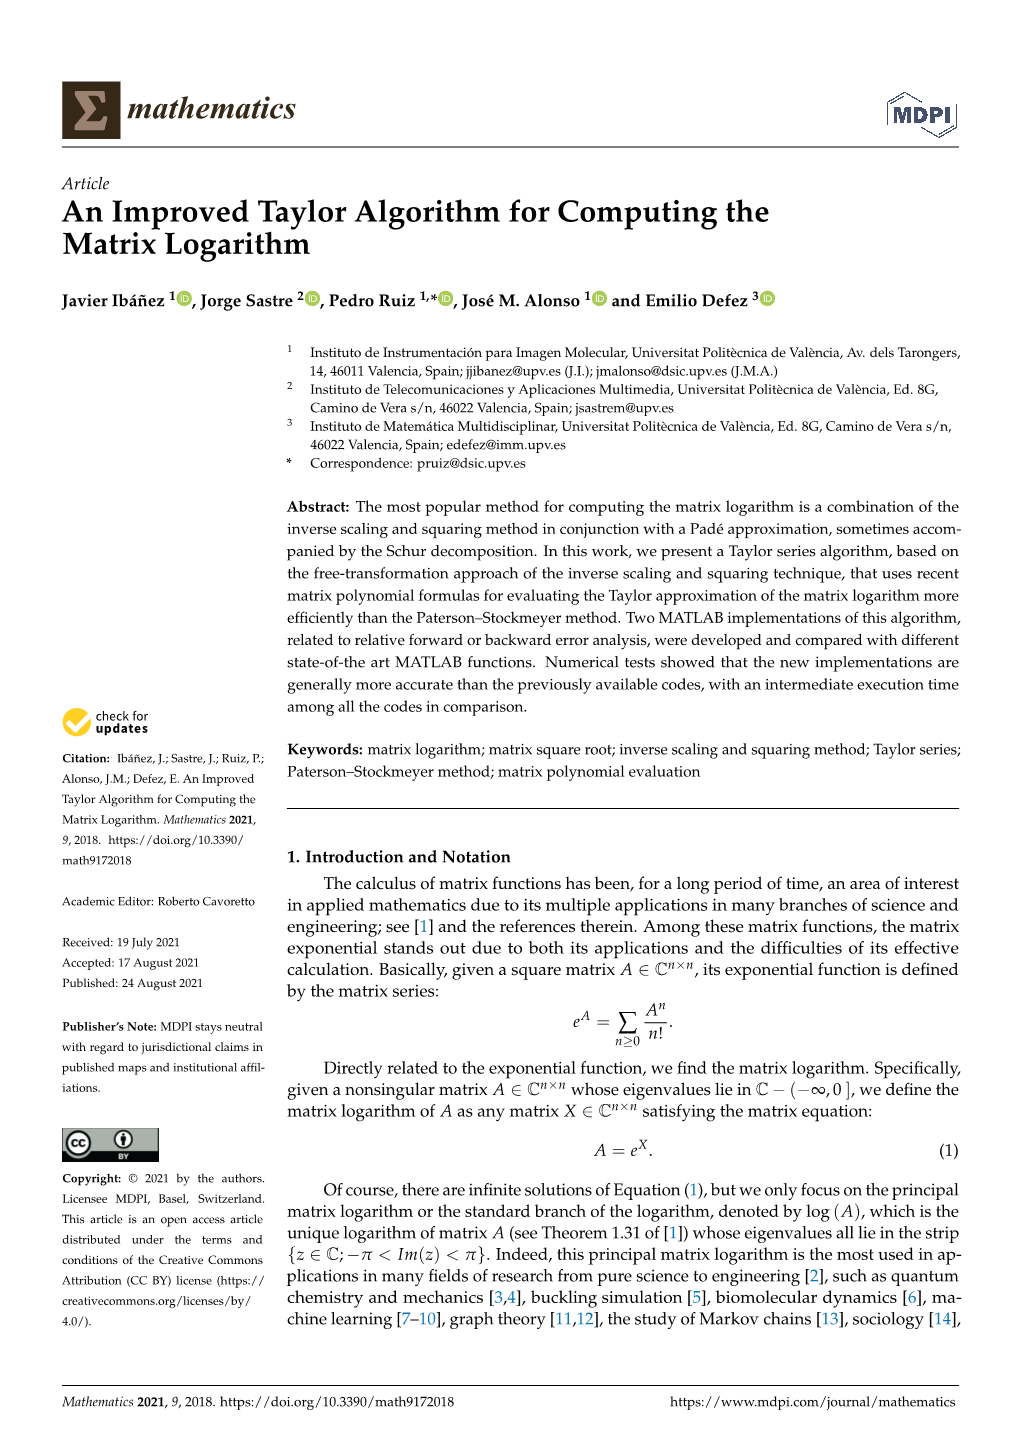 An Improved Taylor Algorithm for Computing the Matrix Logarithm